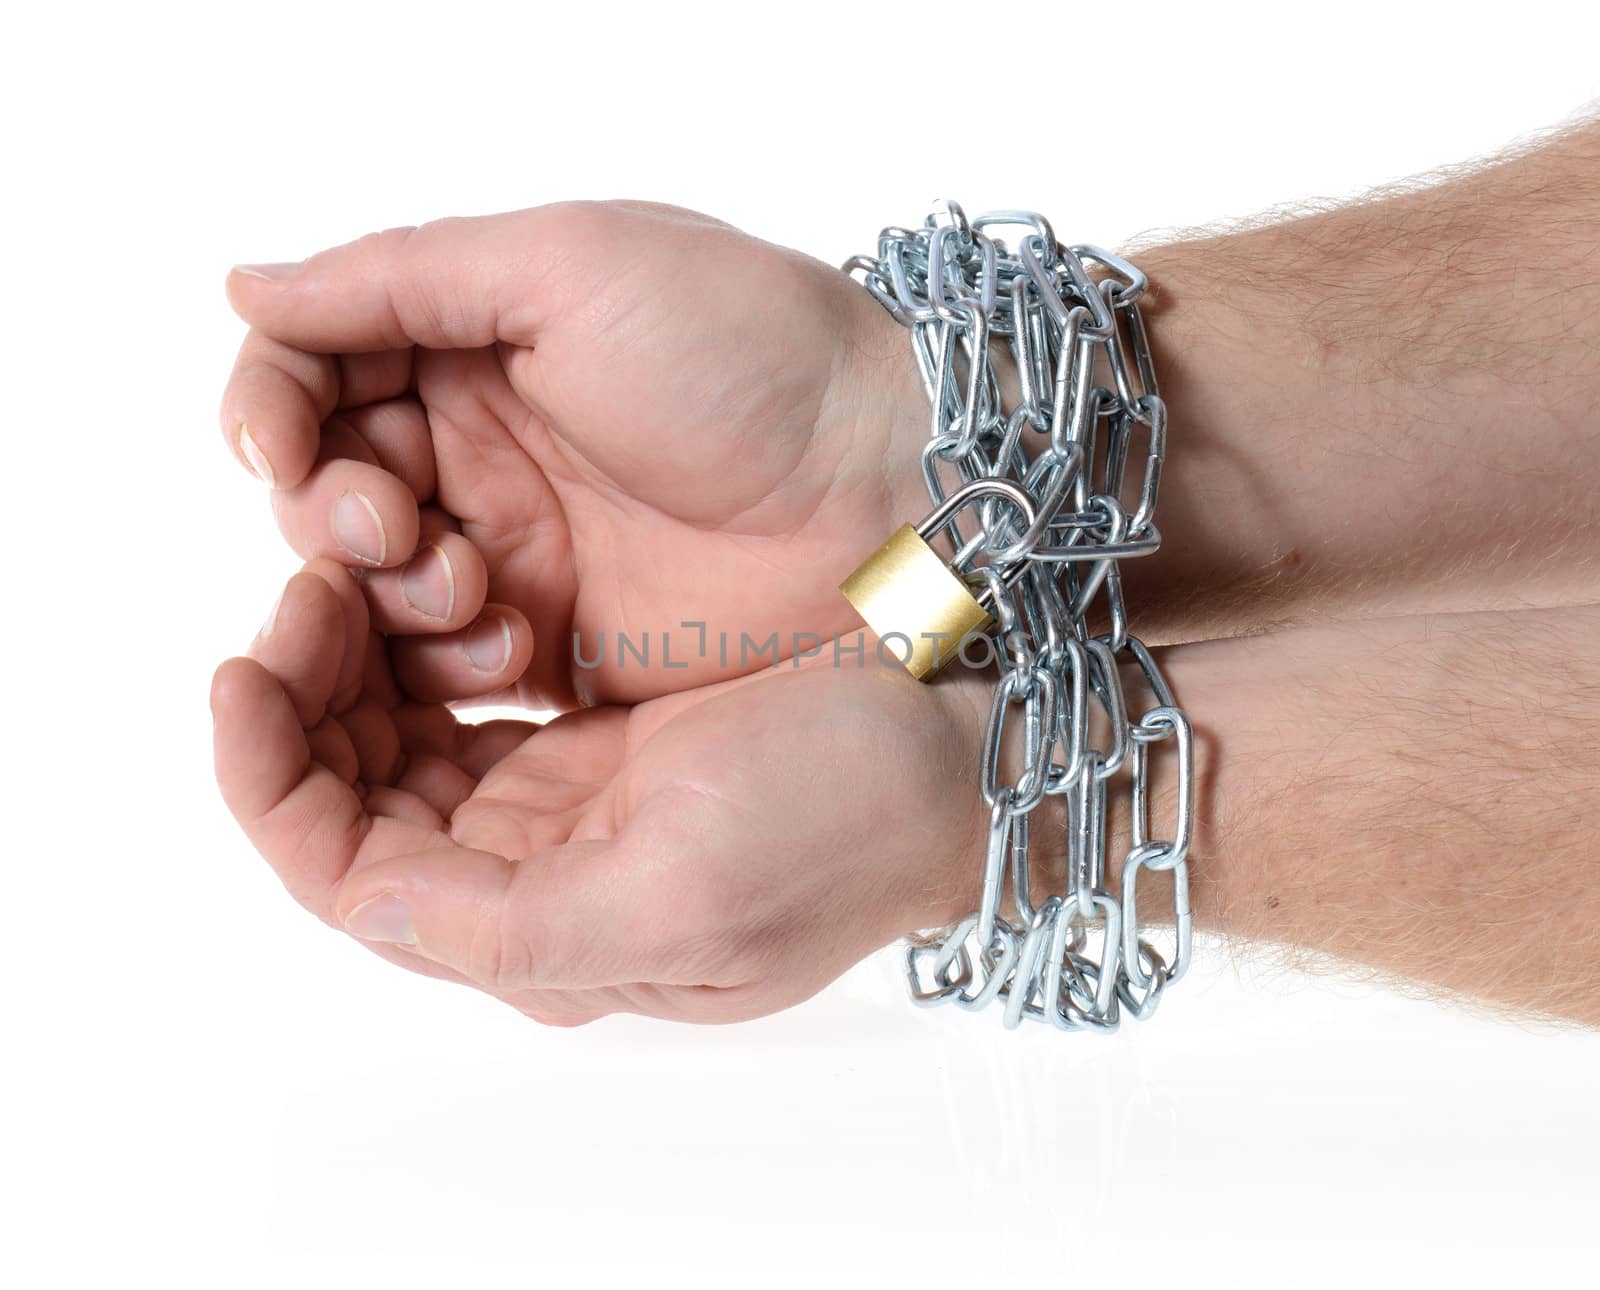 hands ties in chains with a lock